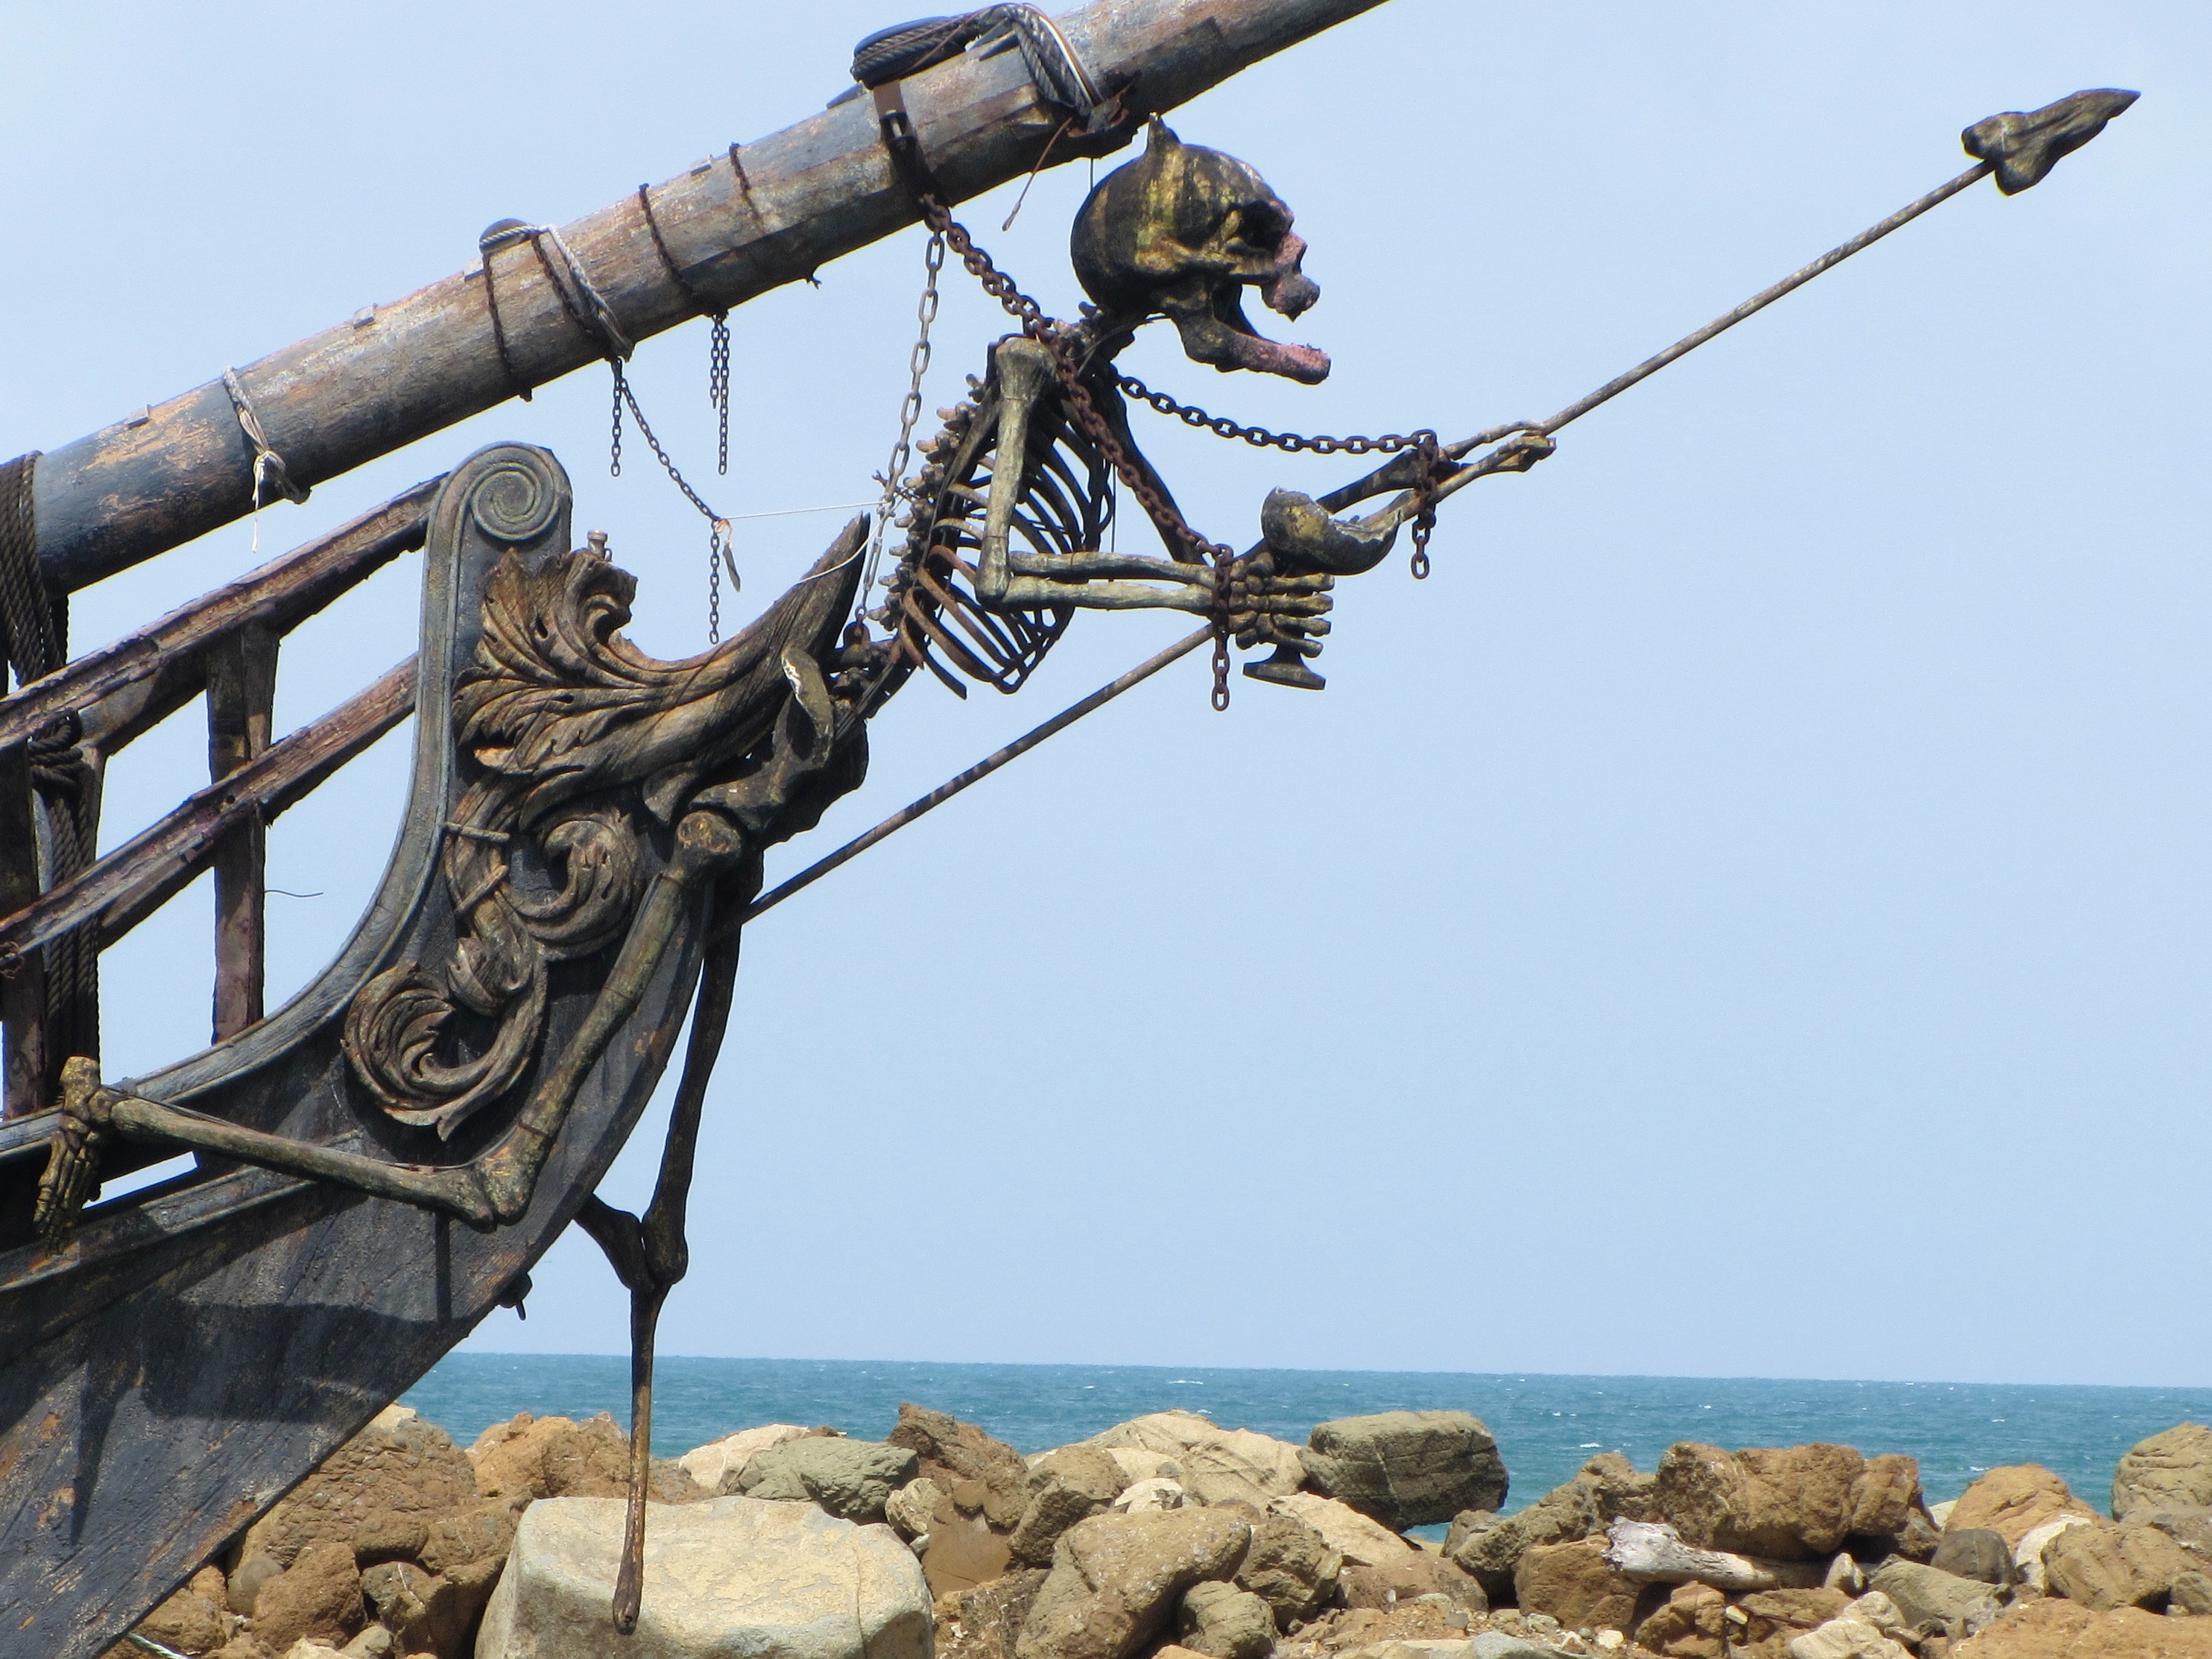 Pirate’s paradise – The maritime bases where thieves and villains ruled